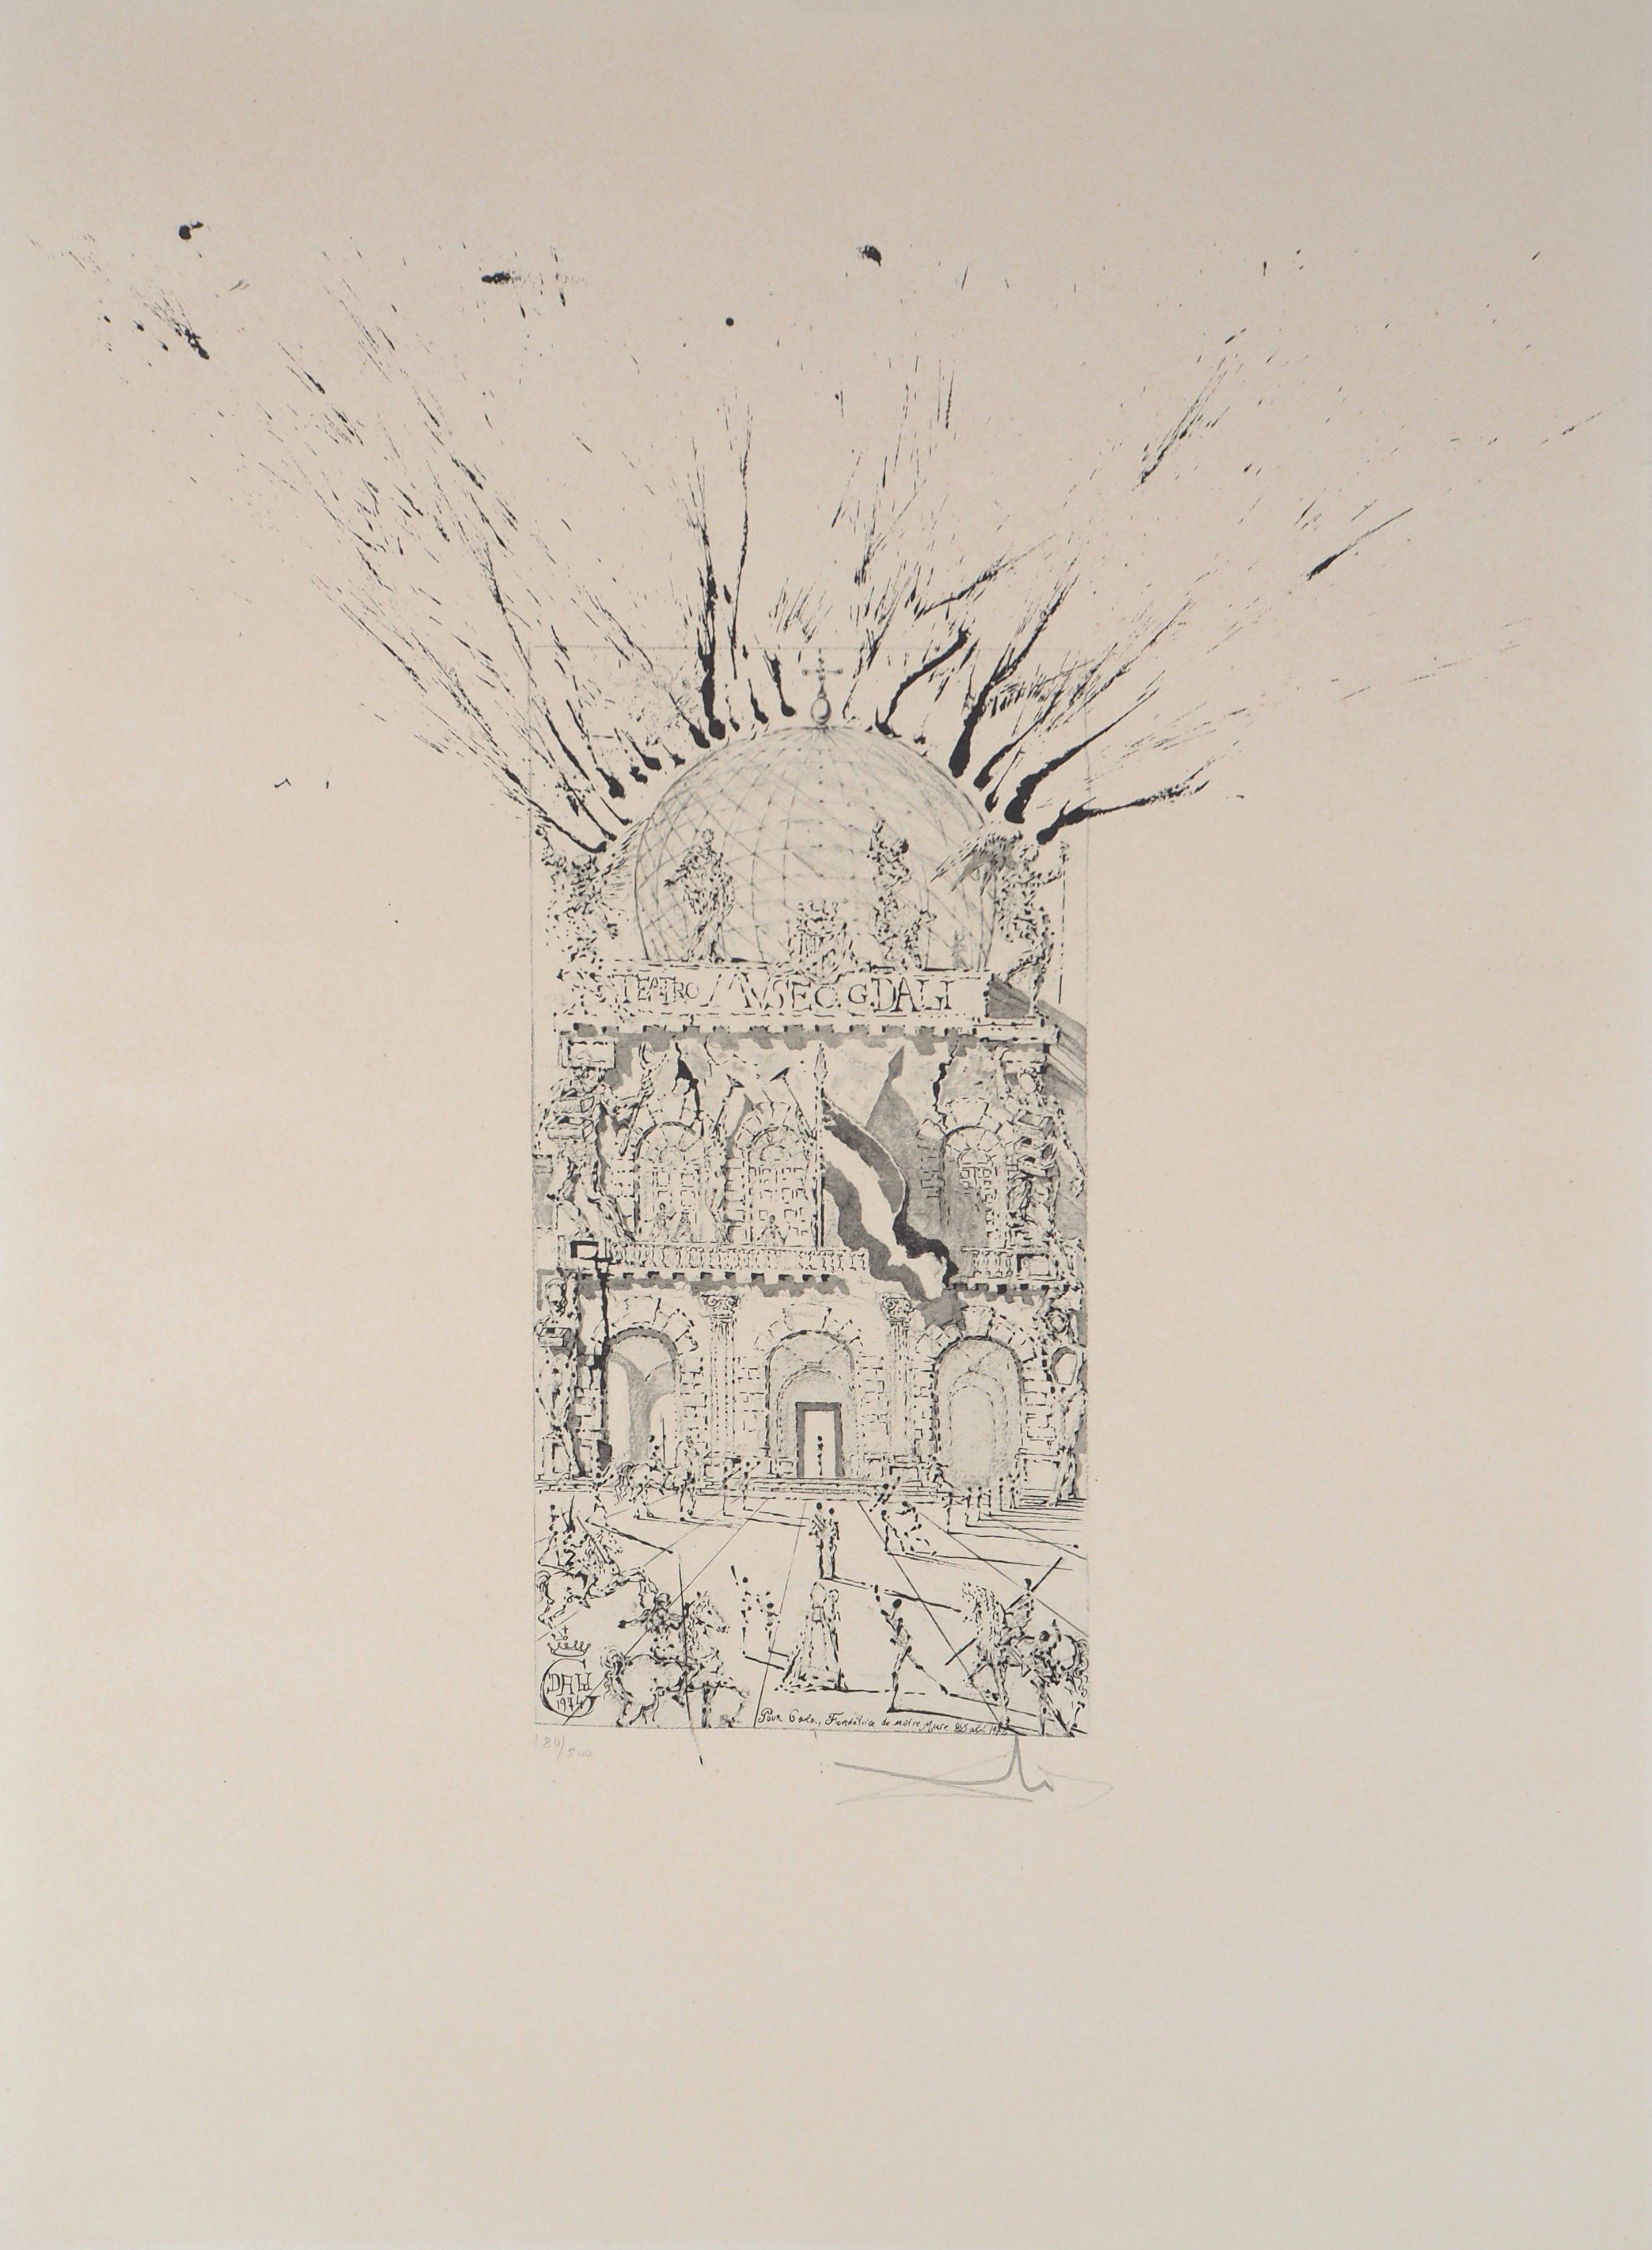 Museum of Figueras - Handsigned Lithograph 